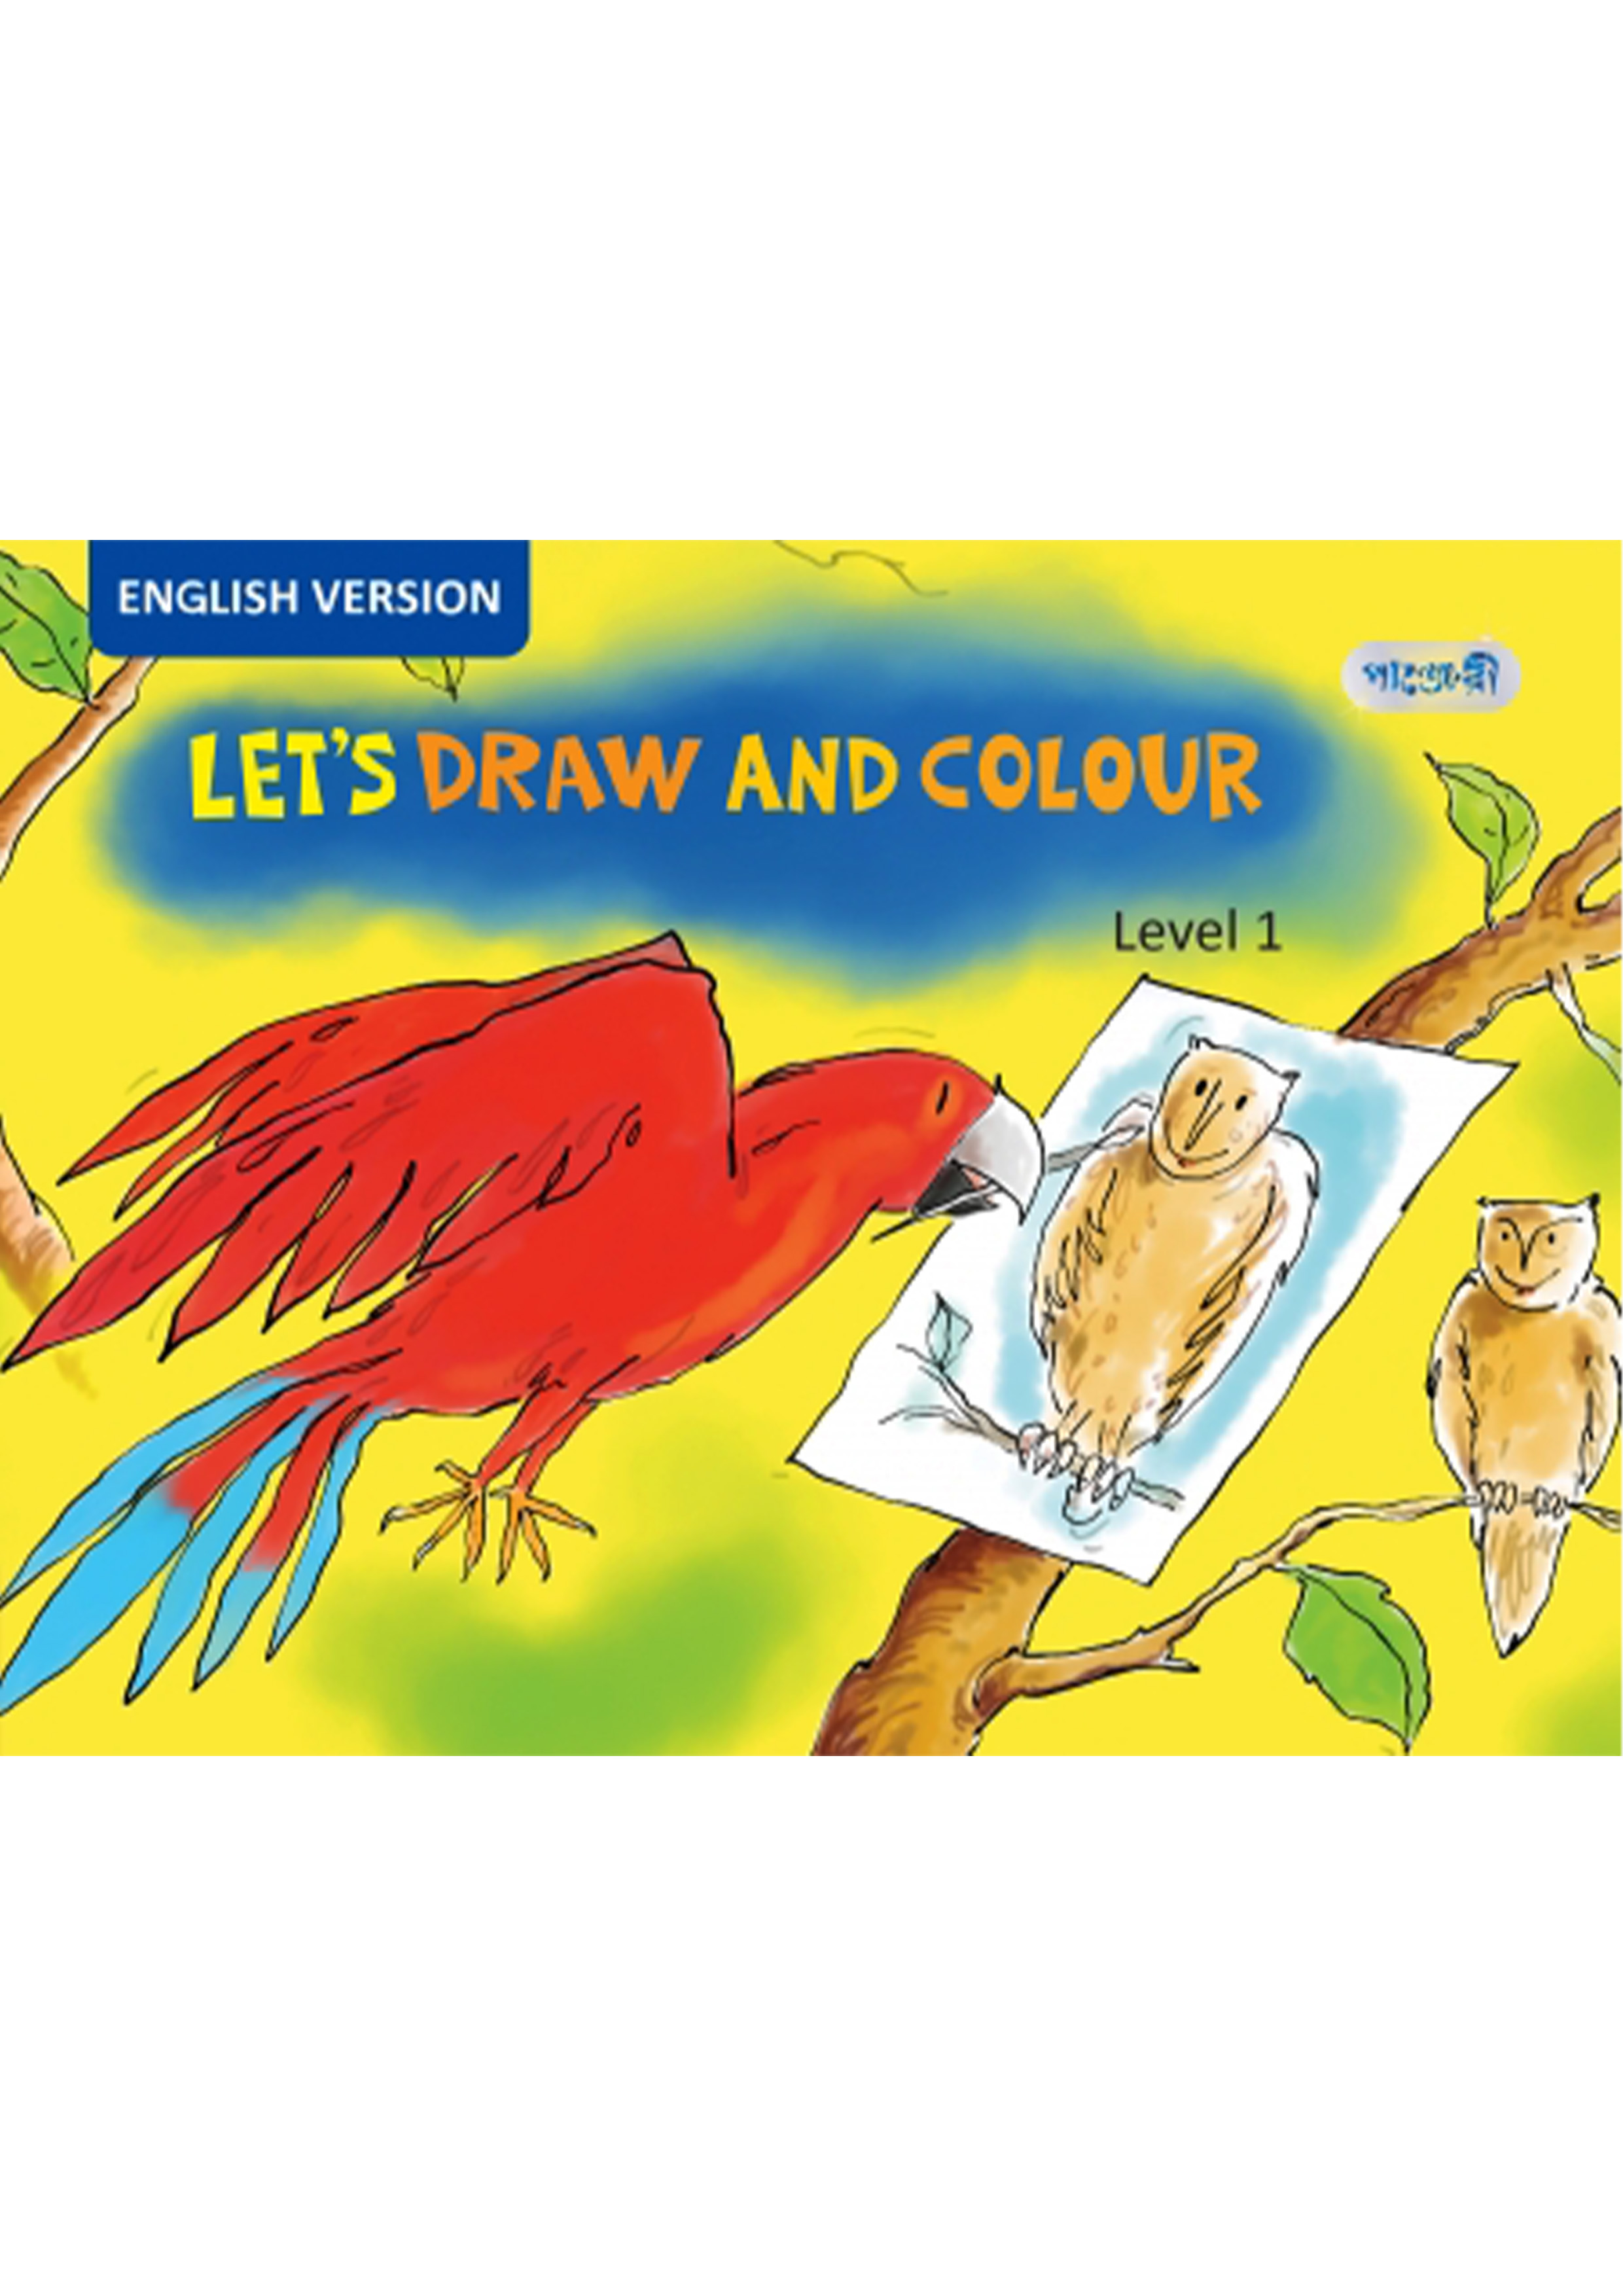 Let's Draw And Colour, Level 1 For Play Group - English Version (পেপারব্যাক)